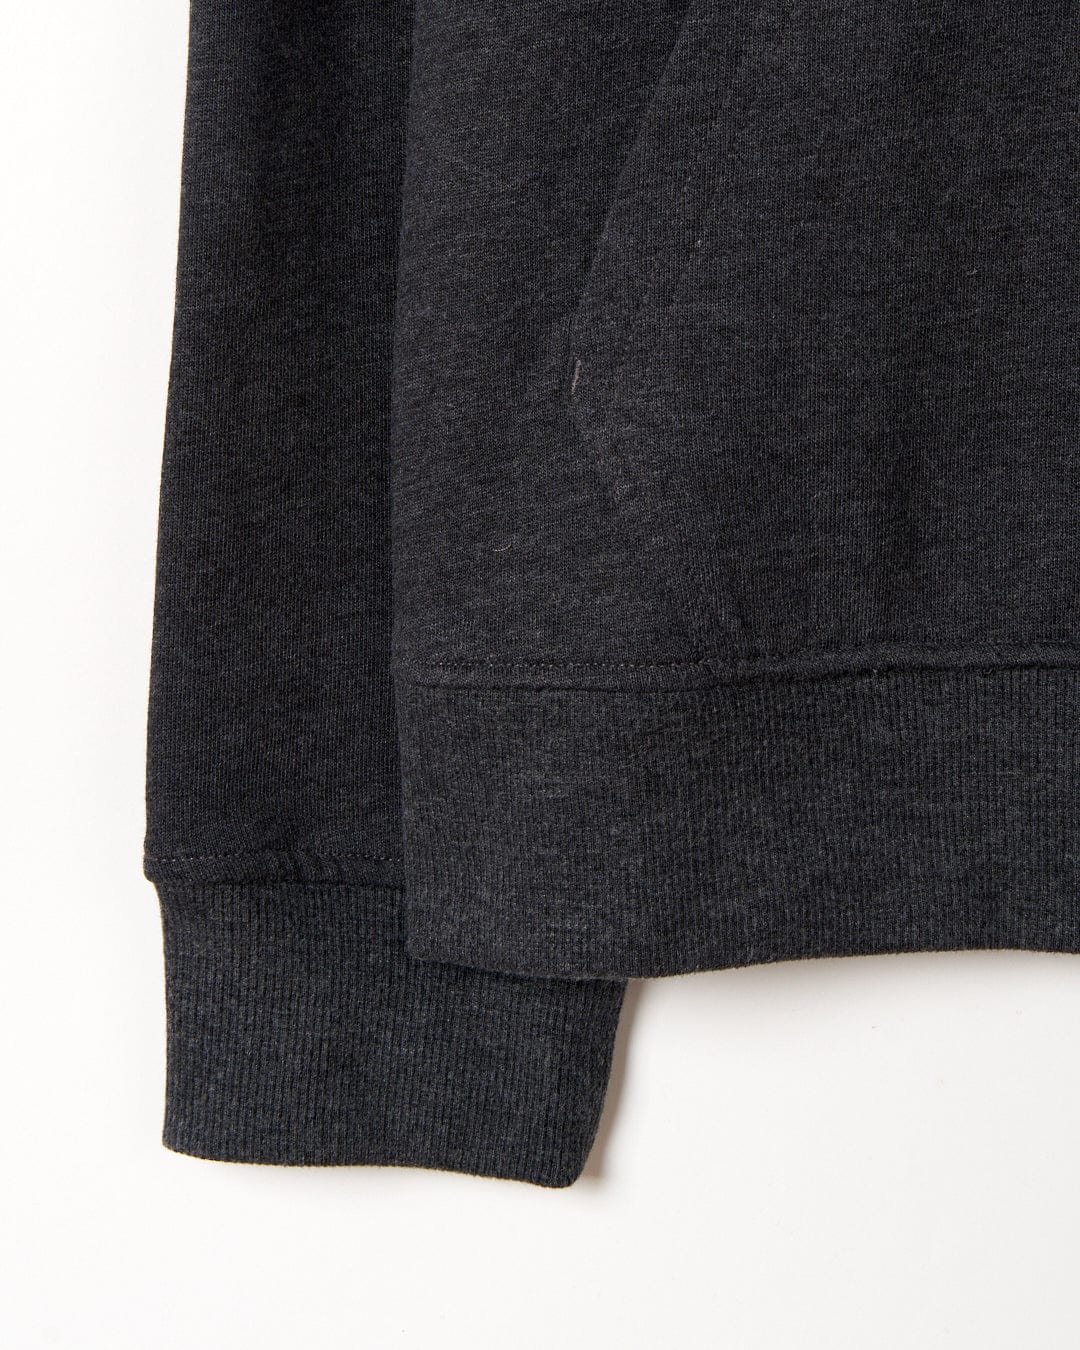 A close up of a Saltrock Sun Sets - Mens Pop Hoodie in Charcoal with striped draw cords.